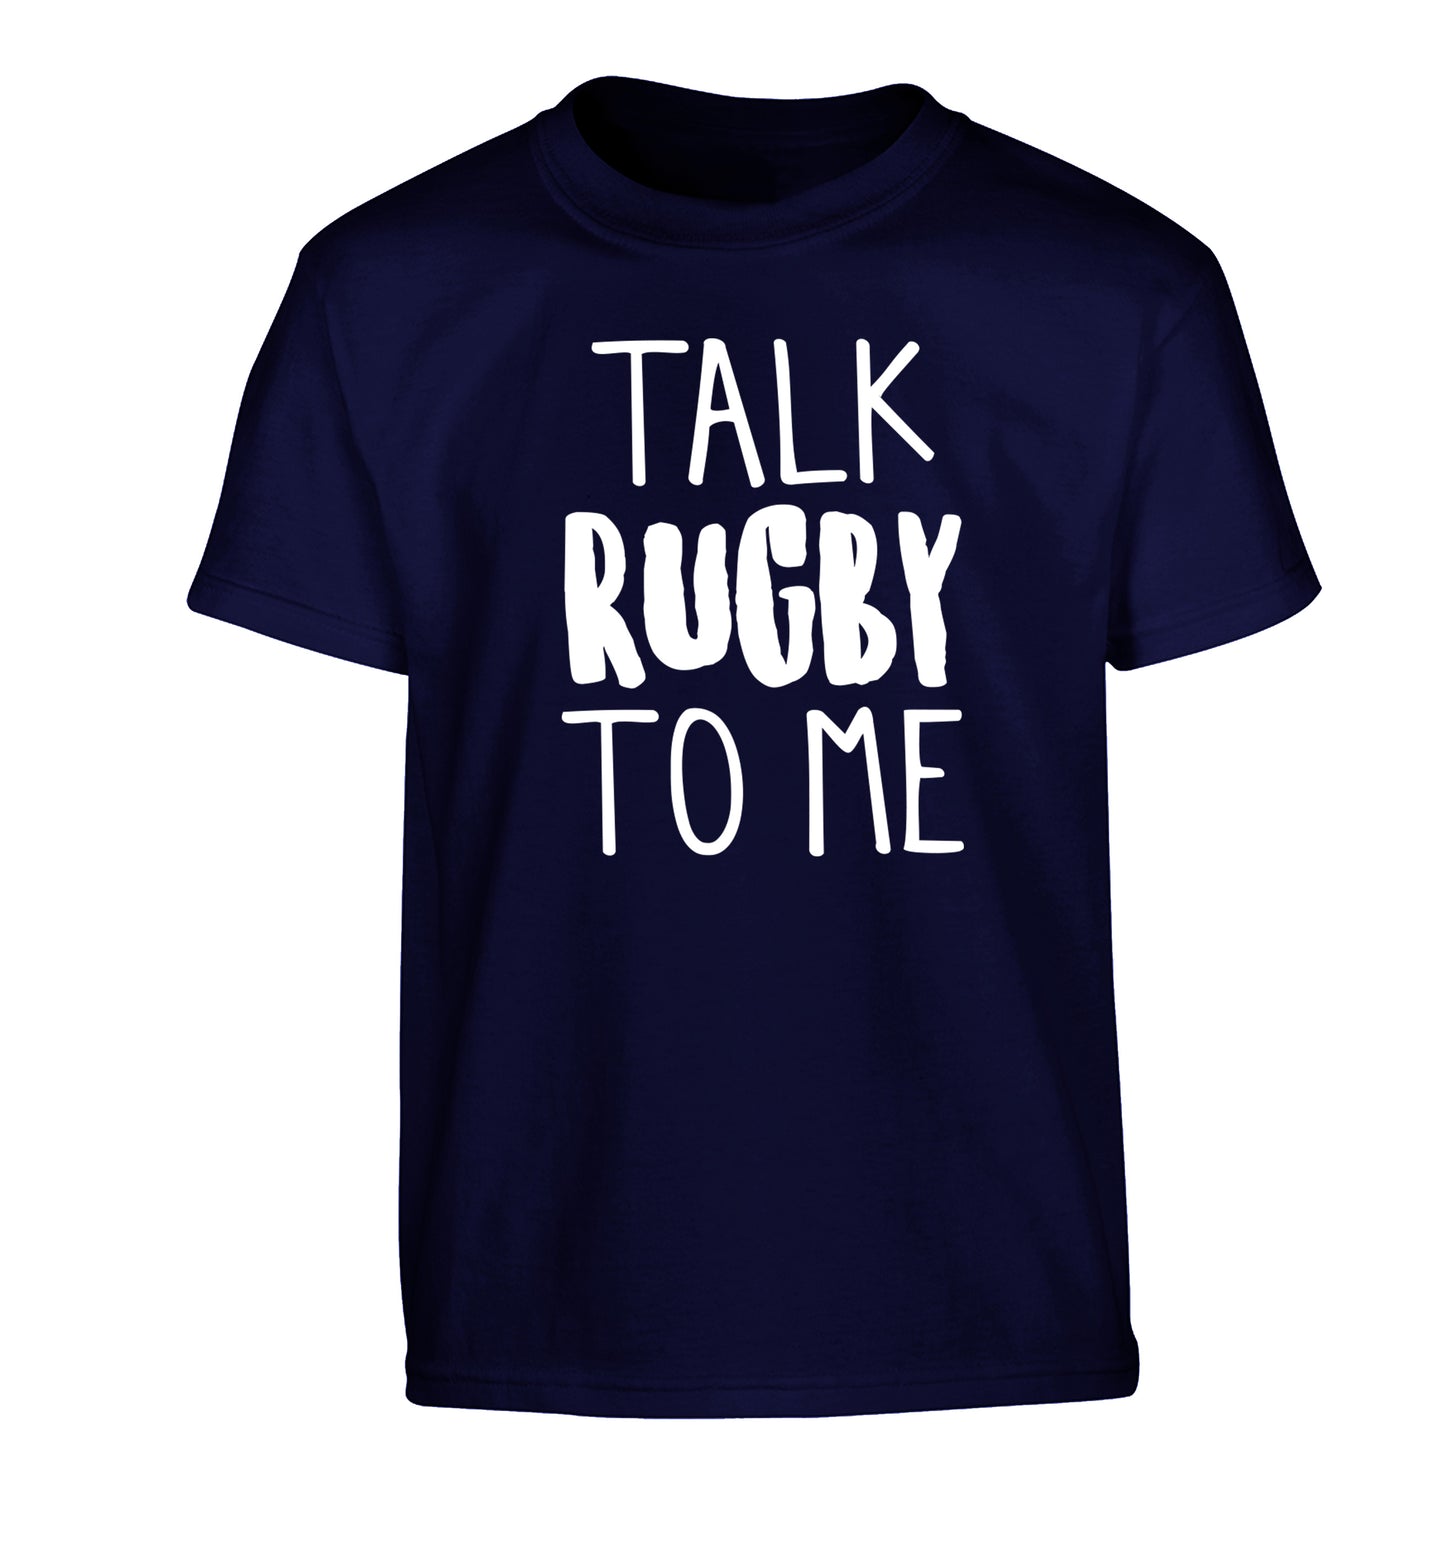 Talk rugby to me Children's navy Tshirt 12-13 Years